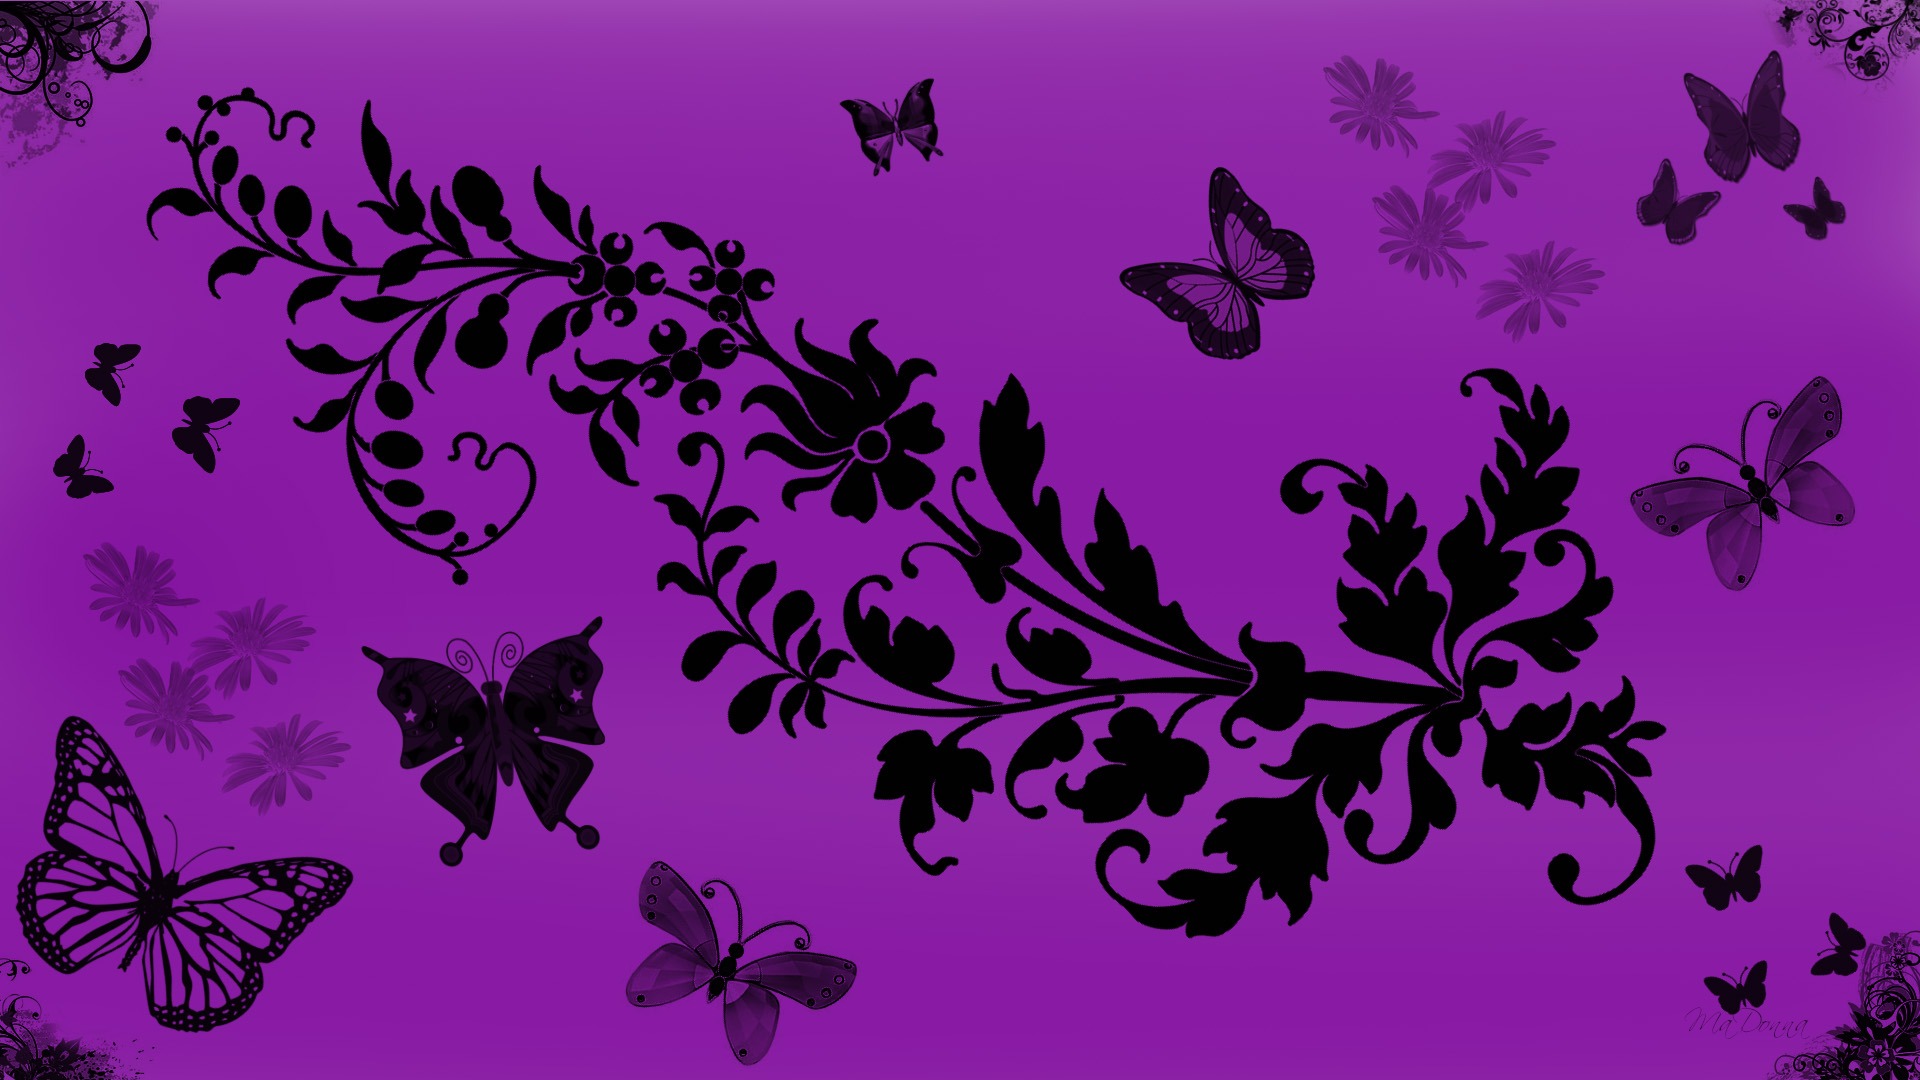 purple butterfly wallpaper Images  Sneha 463813364 on ShareChat